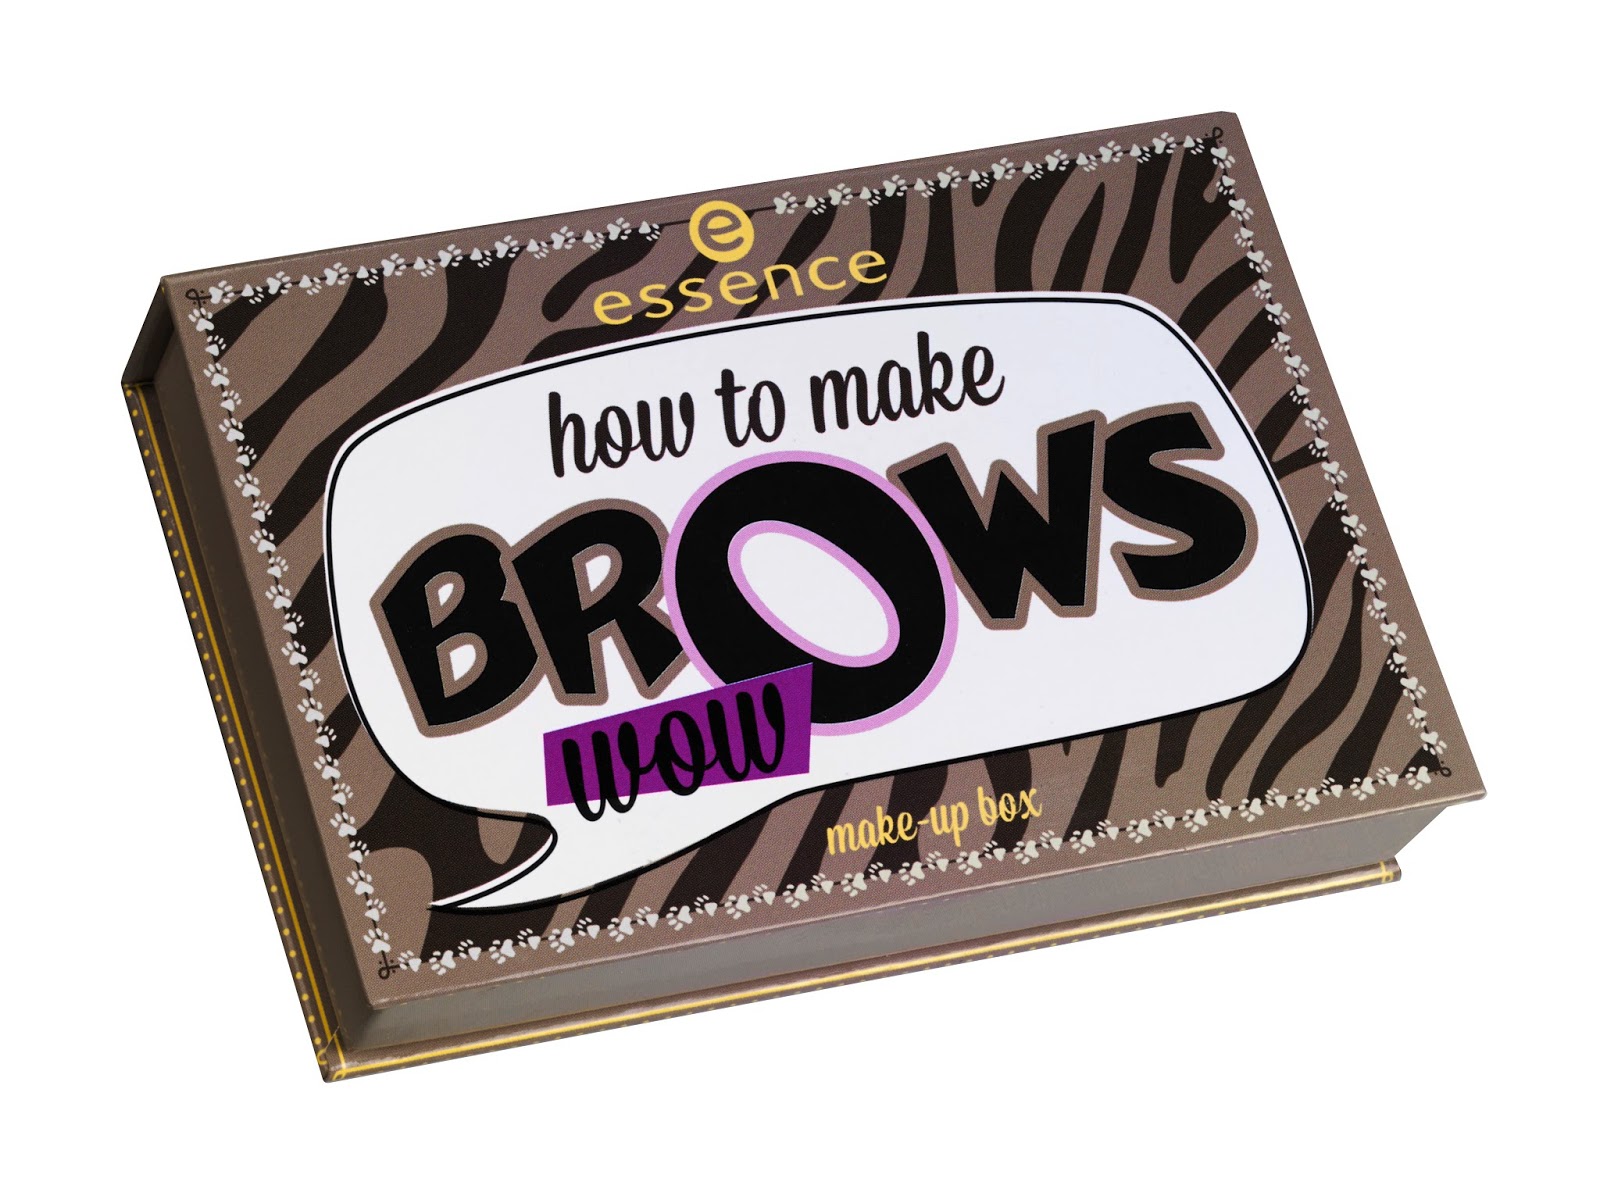 Essence how to make brows wow make-up box